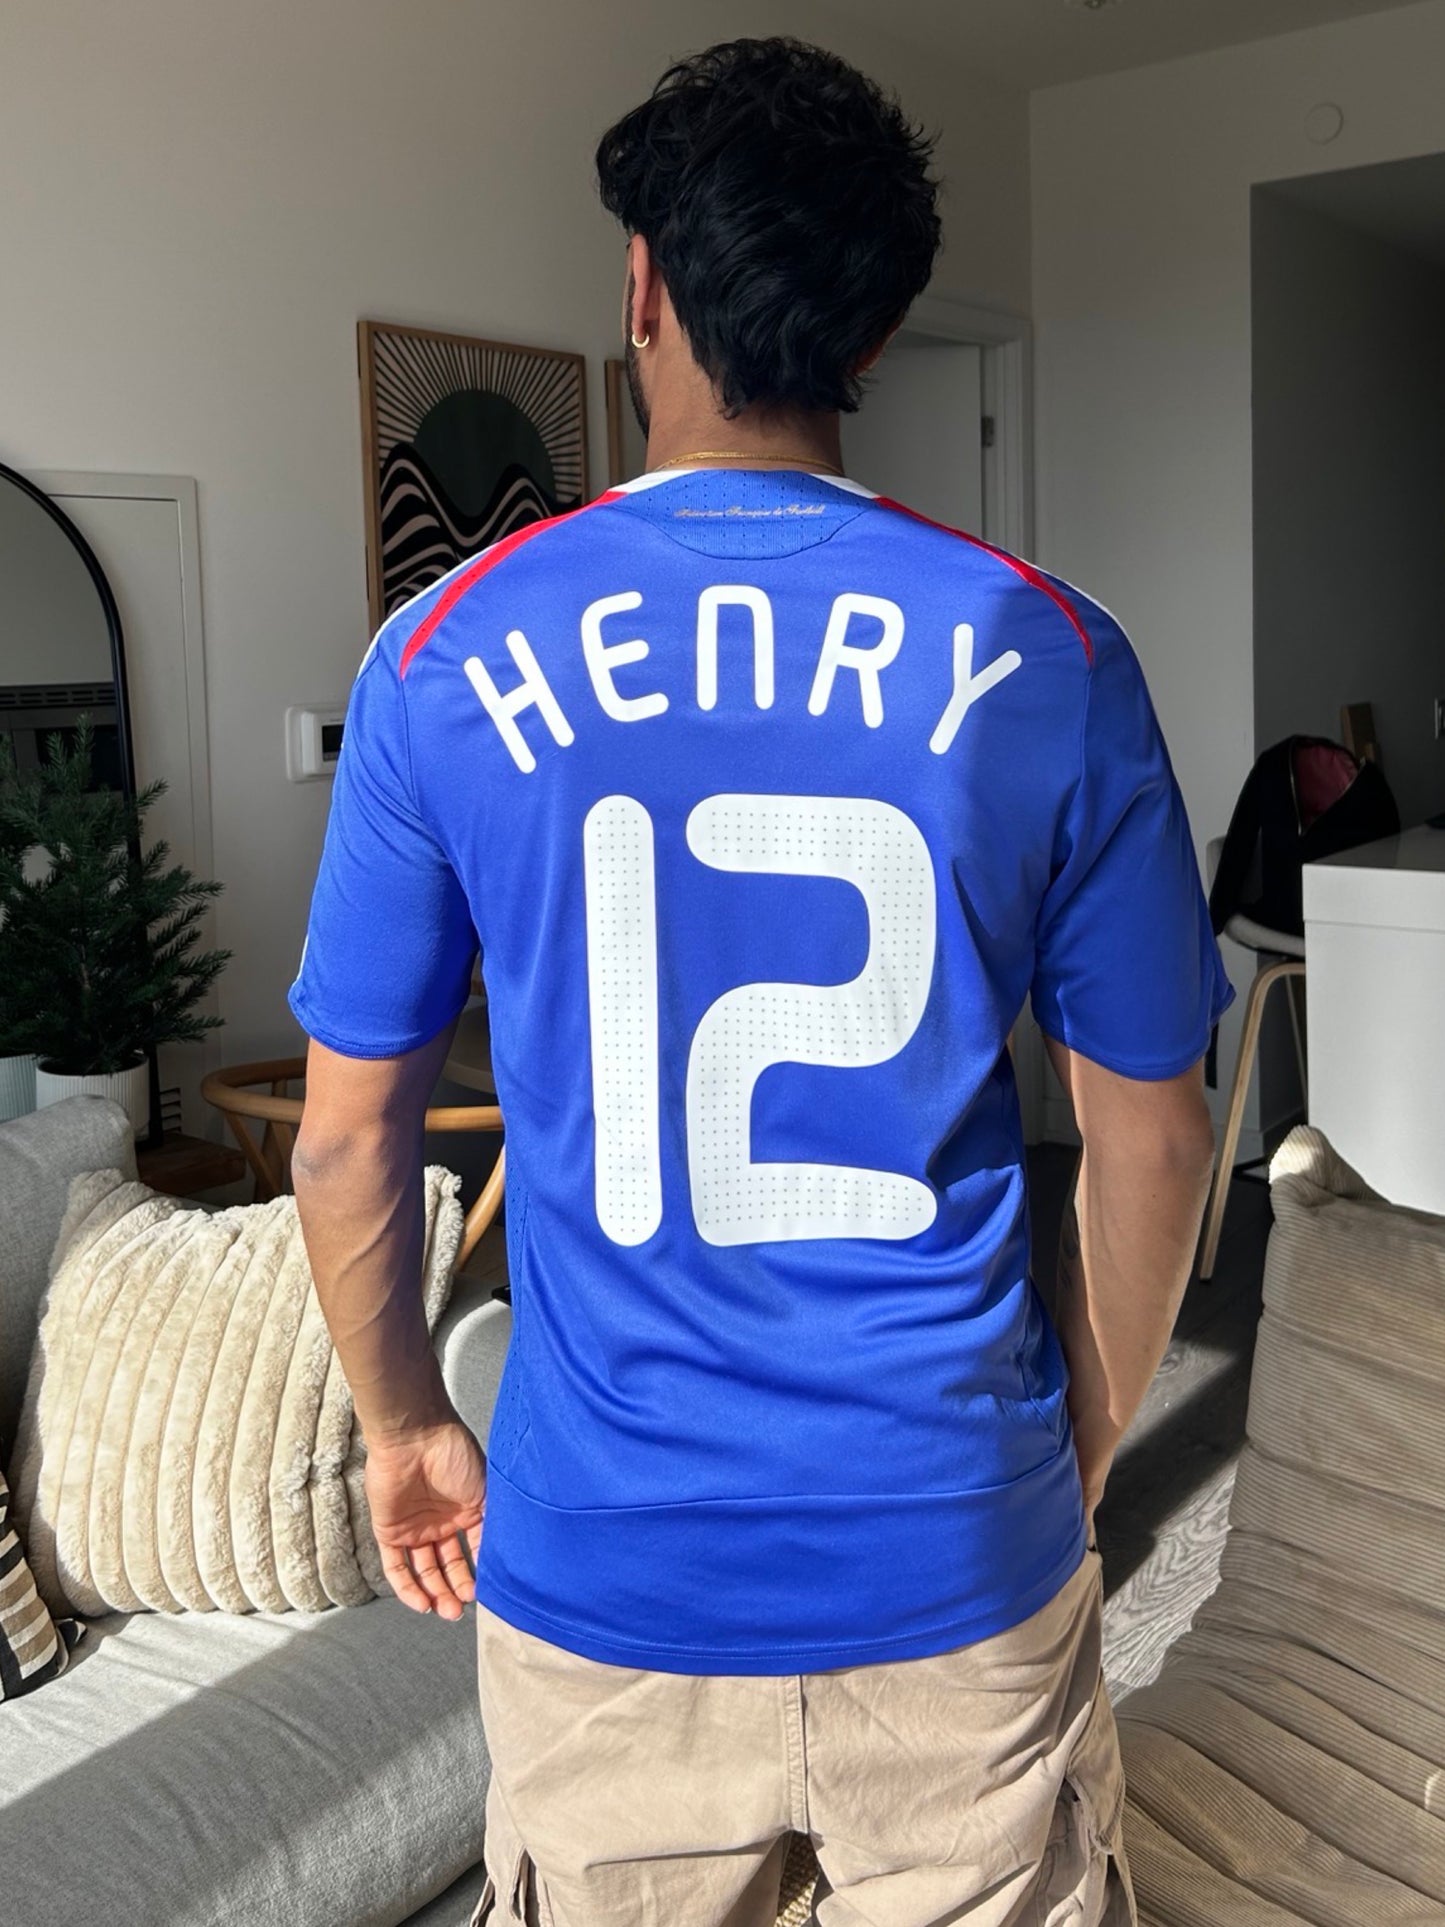 France National Team 2007-08 Home Shirt, #12 Thierry Henry - S